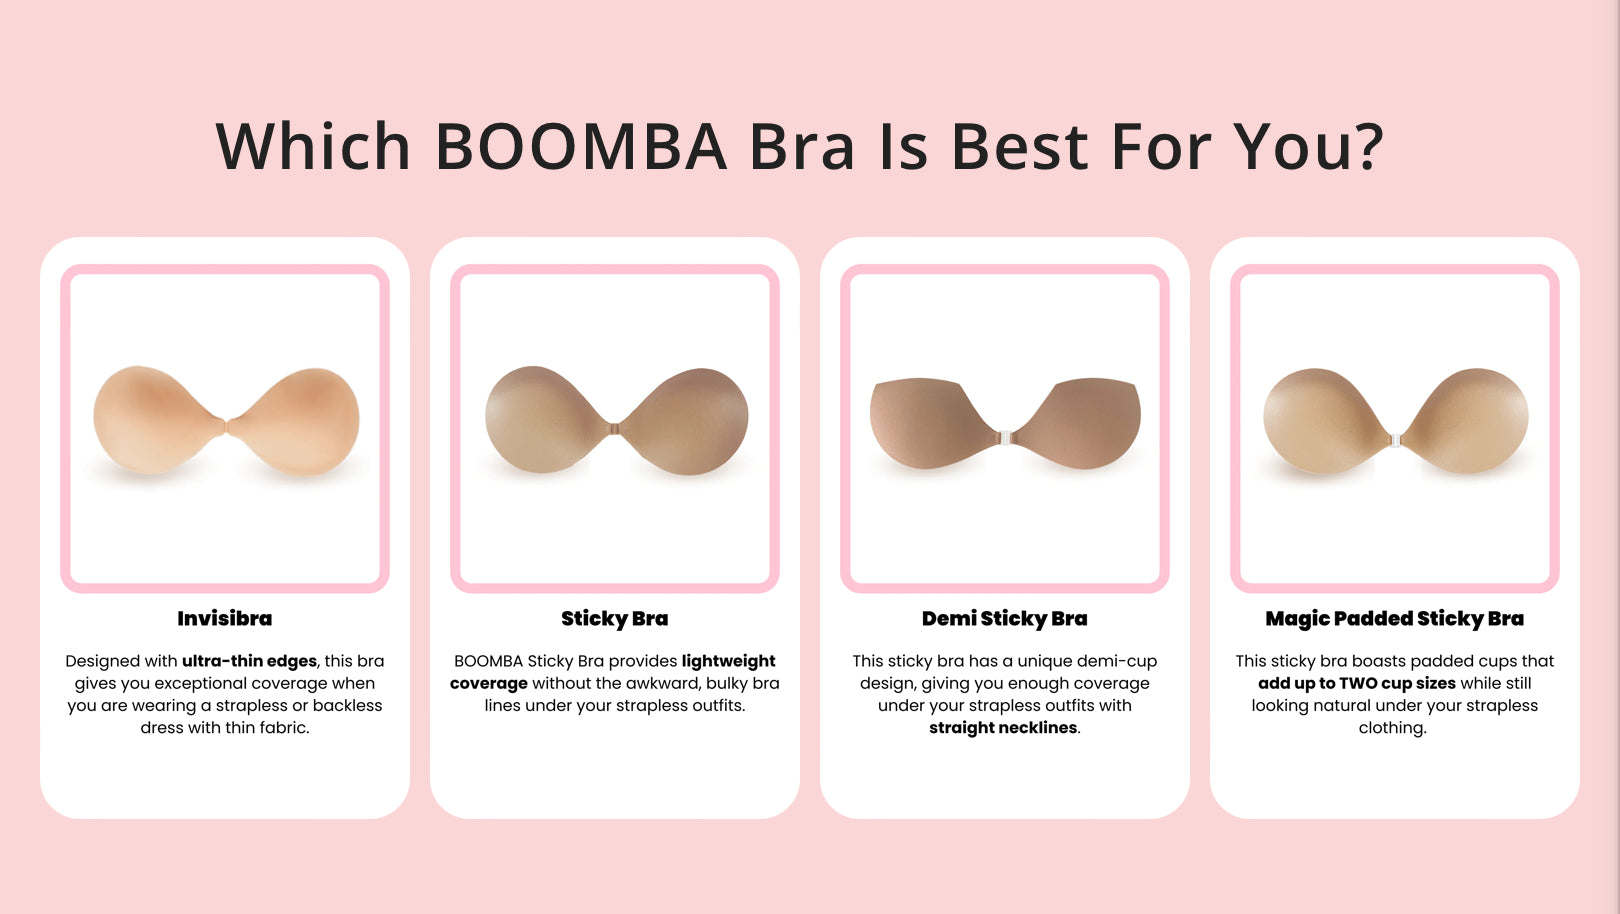 which boomba Demi Sticky Bra is best for you?